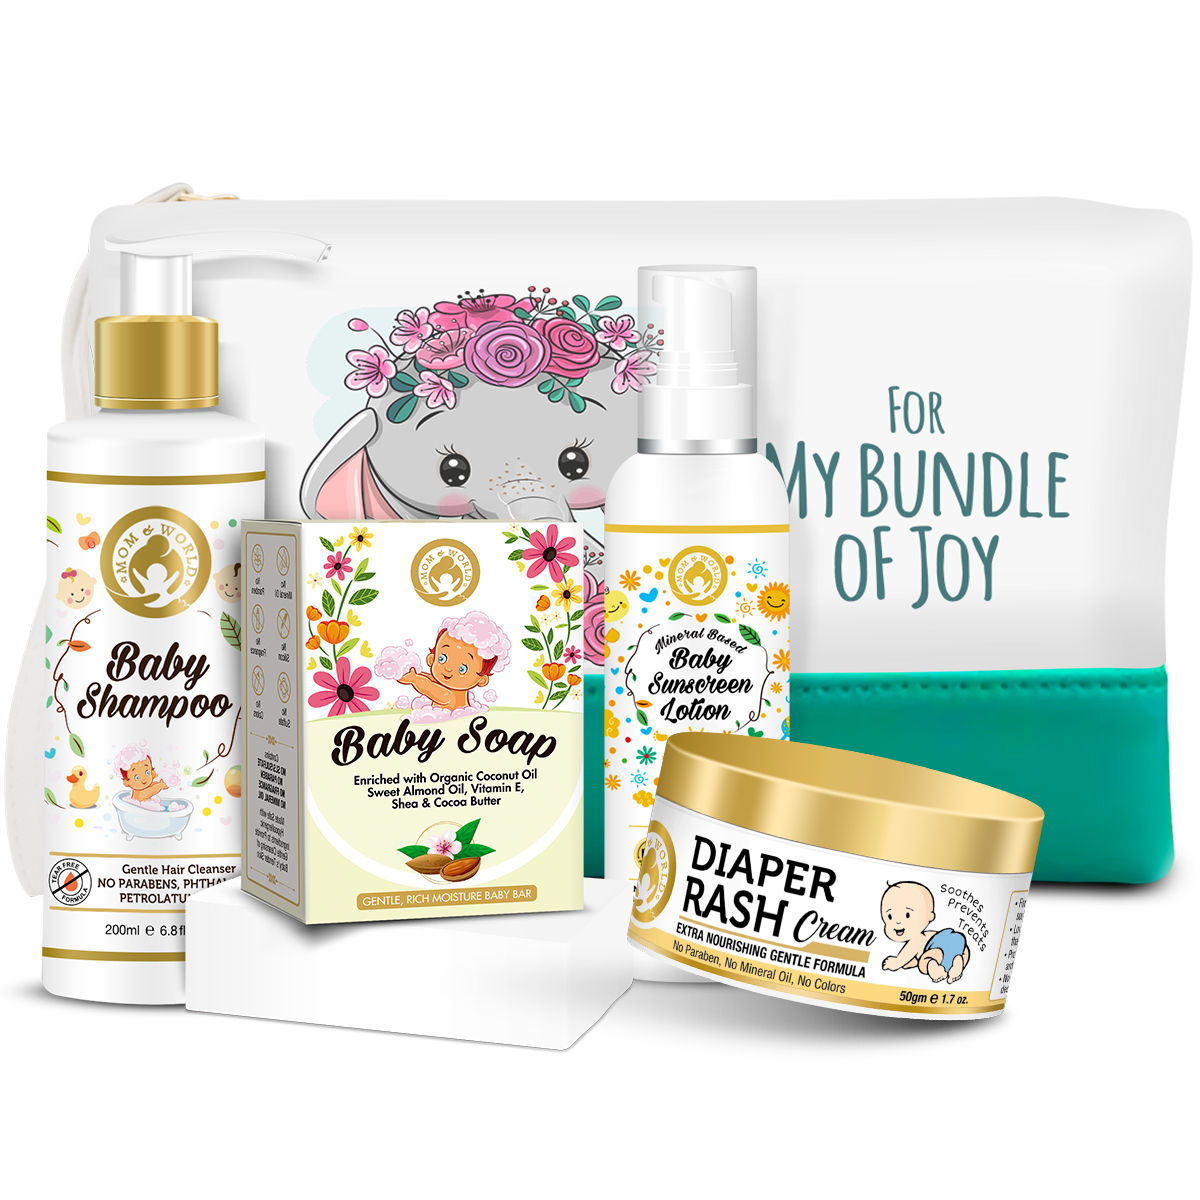 Mom & World Baby Shampoo + Baby Sunscreen Lotion + Baby Soap + Diaper Rash Cream With Pouch